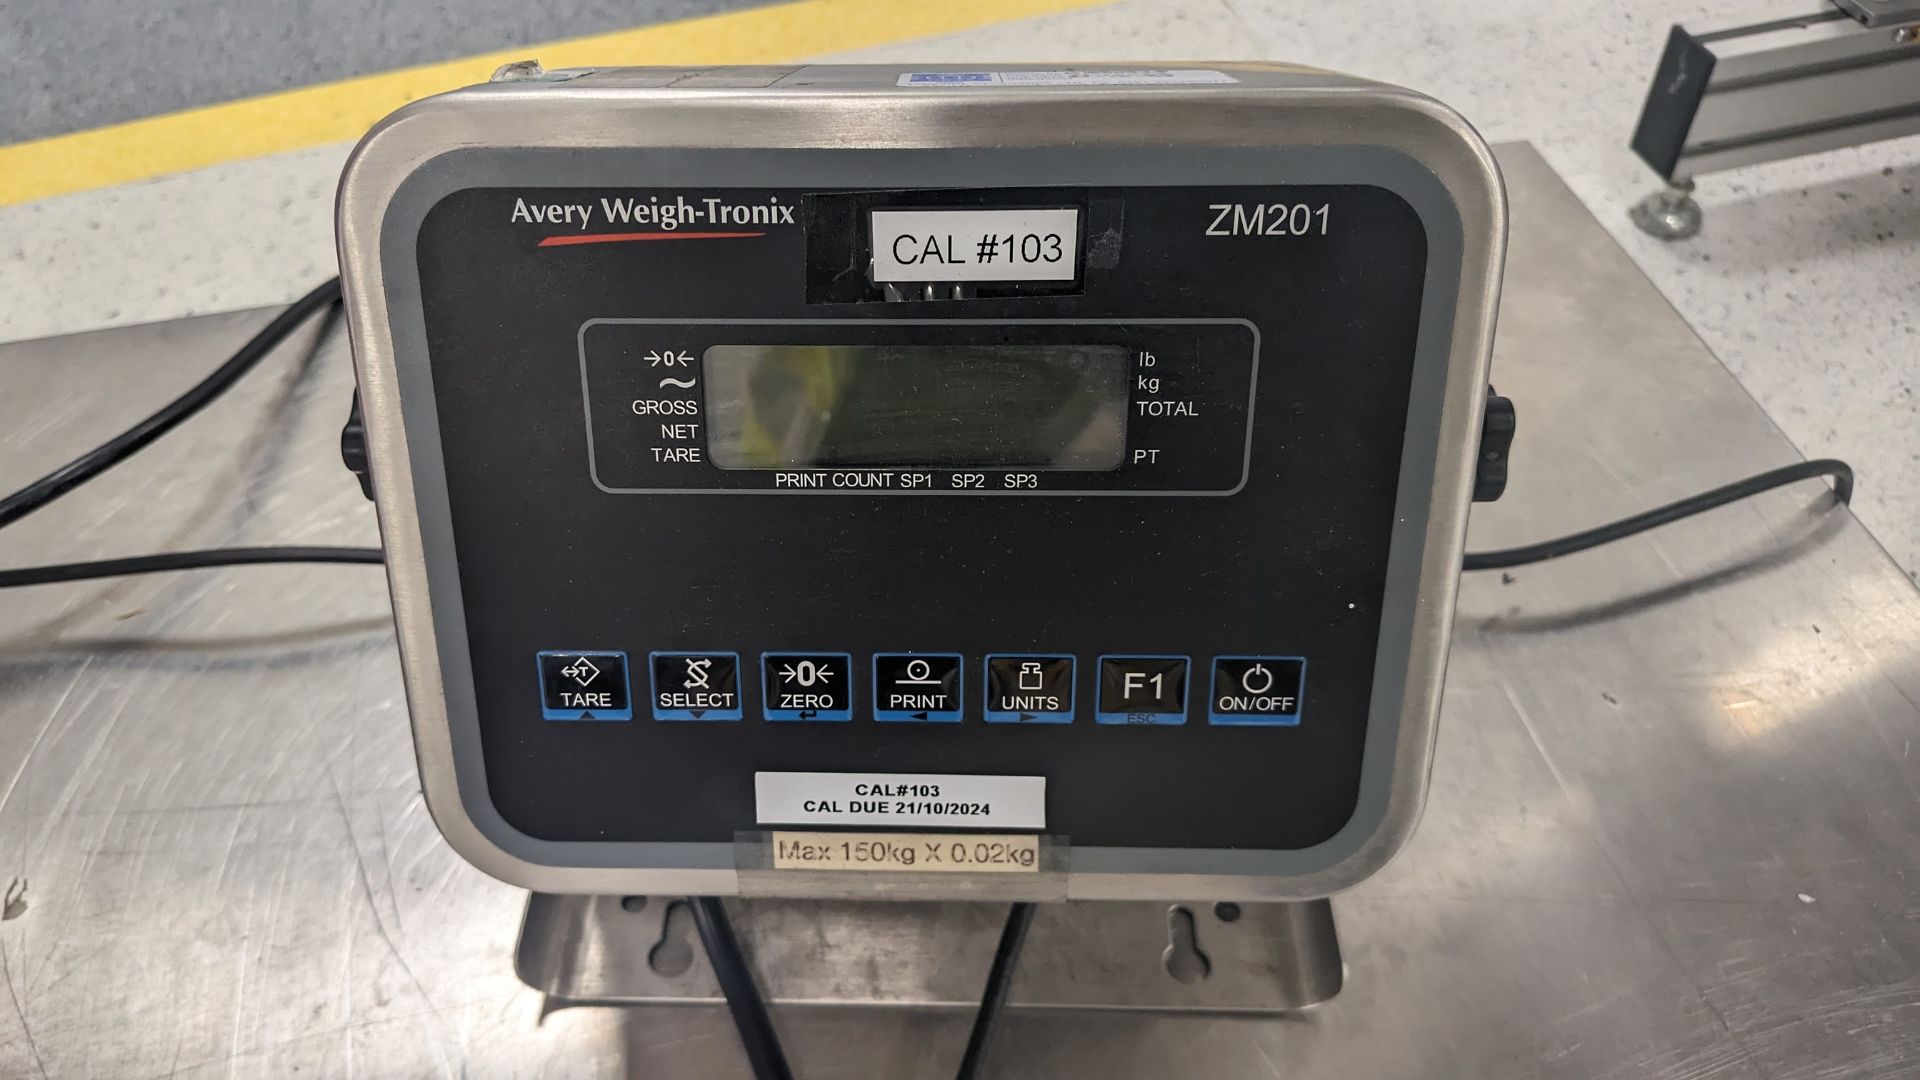 Avery Weigh-Tronix ZM201 industrial scale - Image 2 of 2